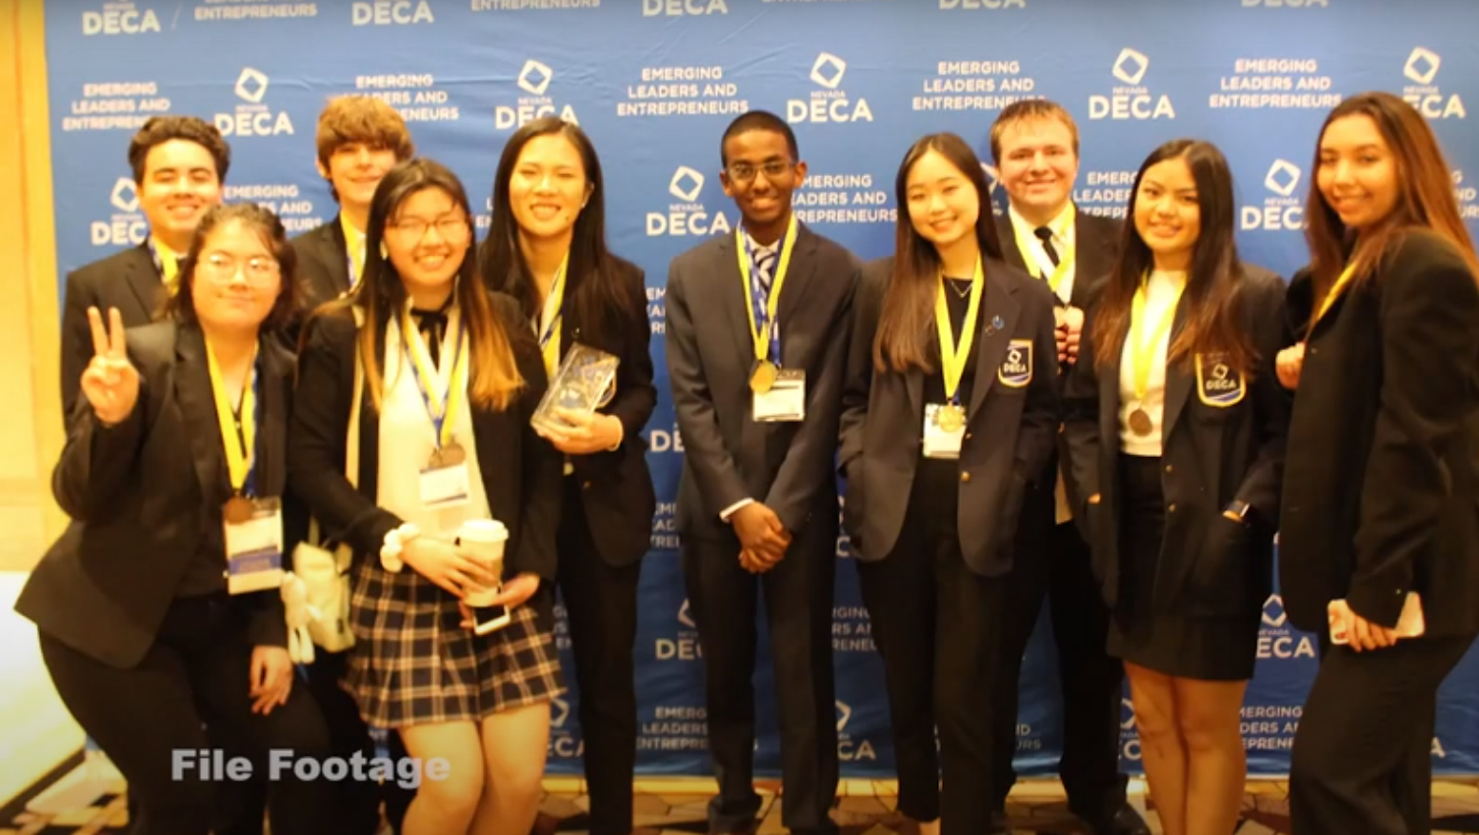 VIDEO: DECA goes to virtual state